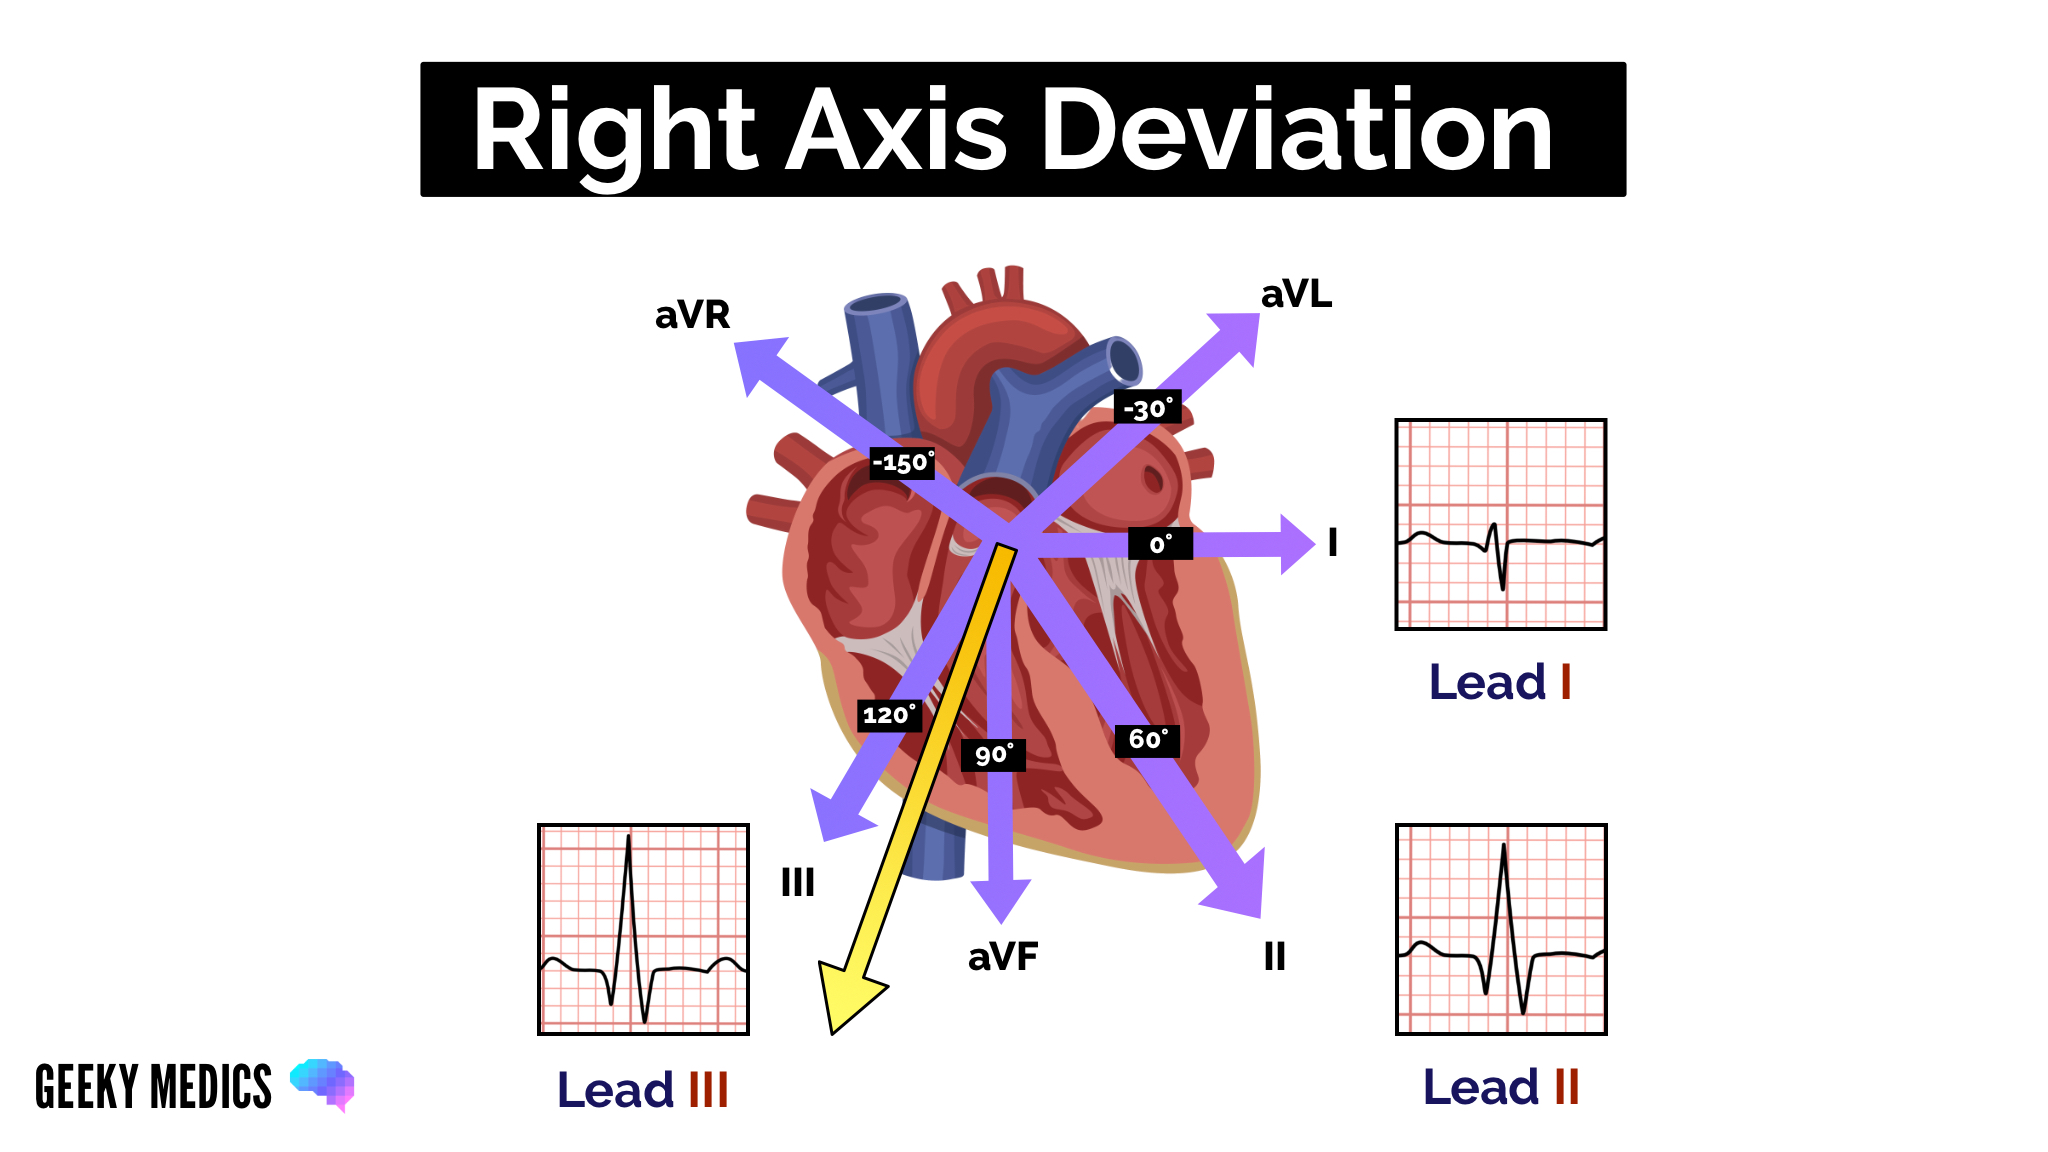 Right Axis Deviation